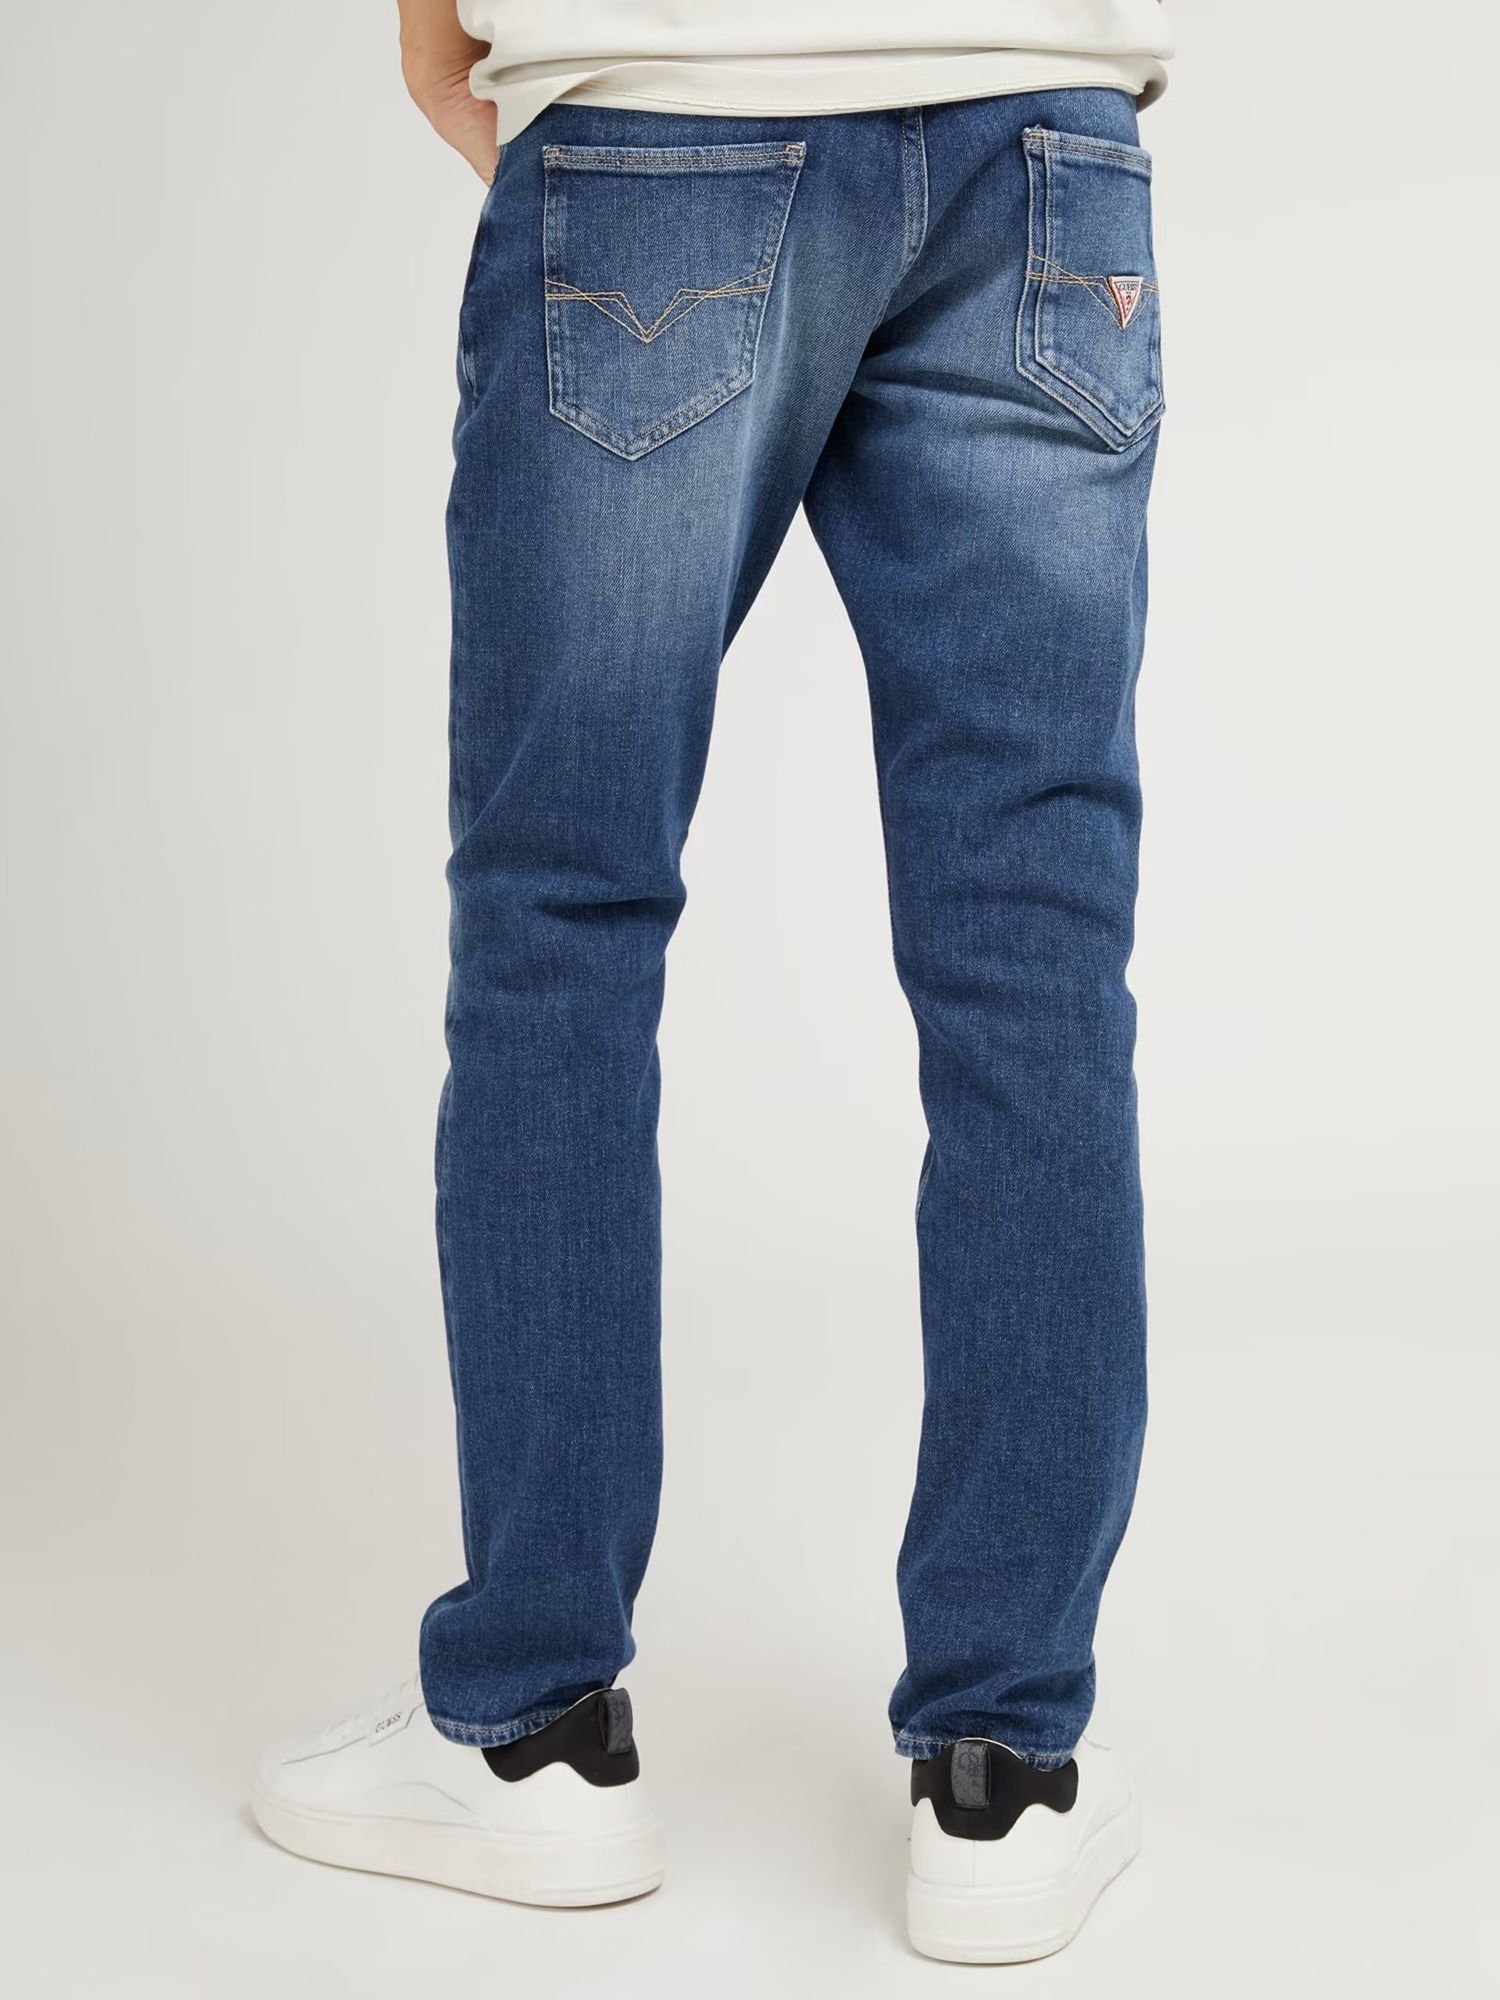 GUESS Miami Skinny Fit Jeans, Carry Mid., W32/L30